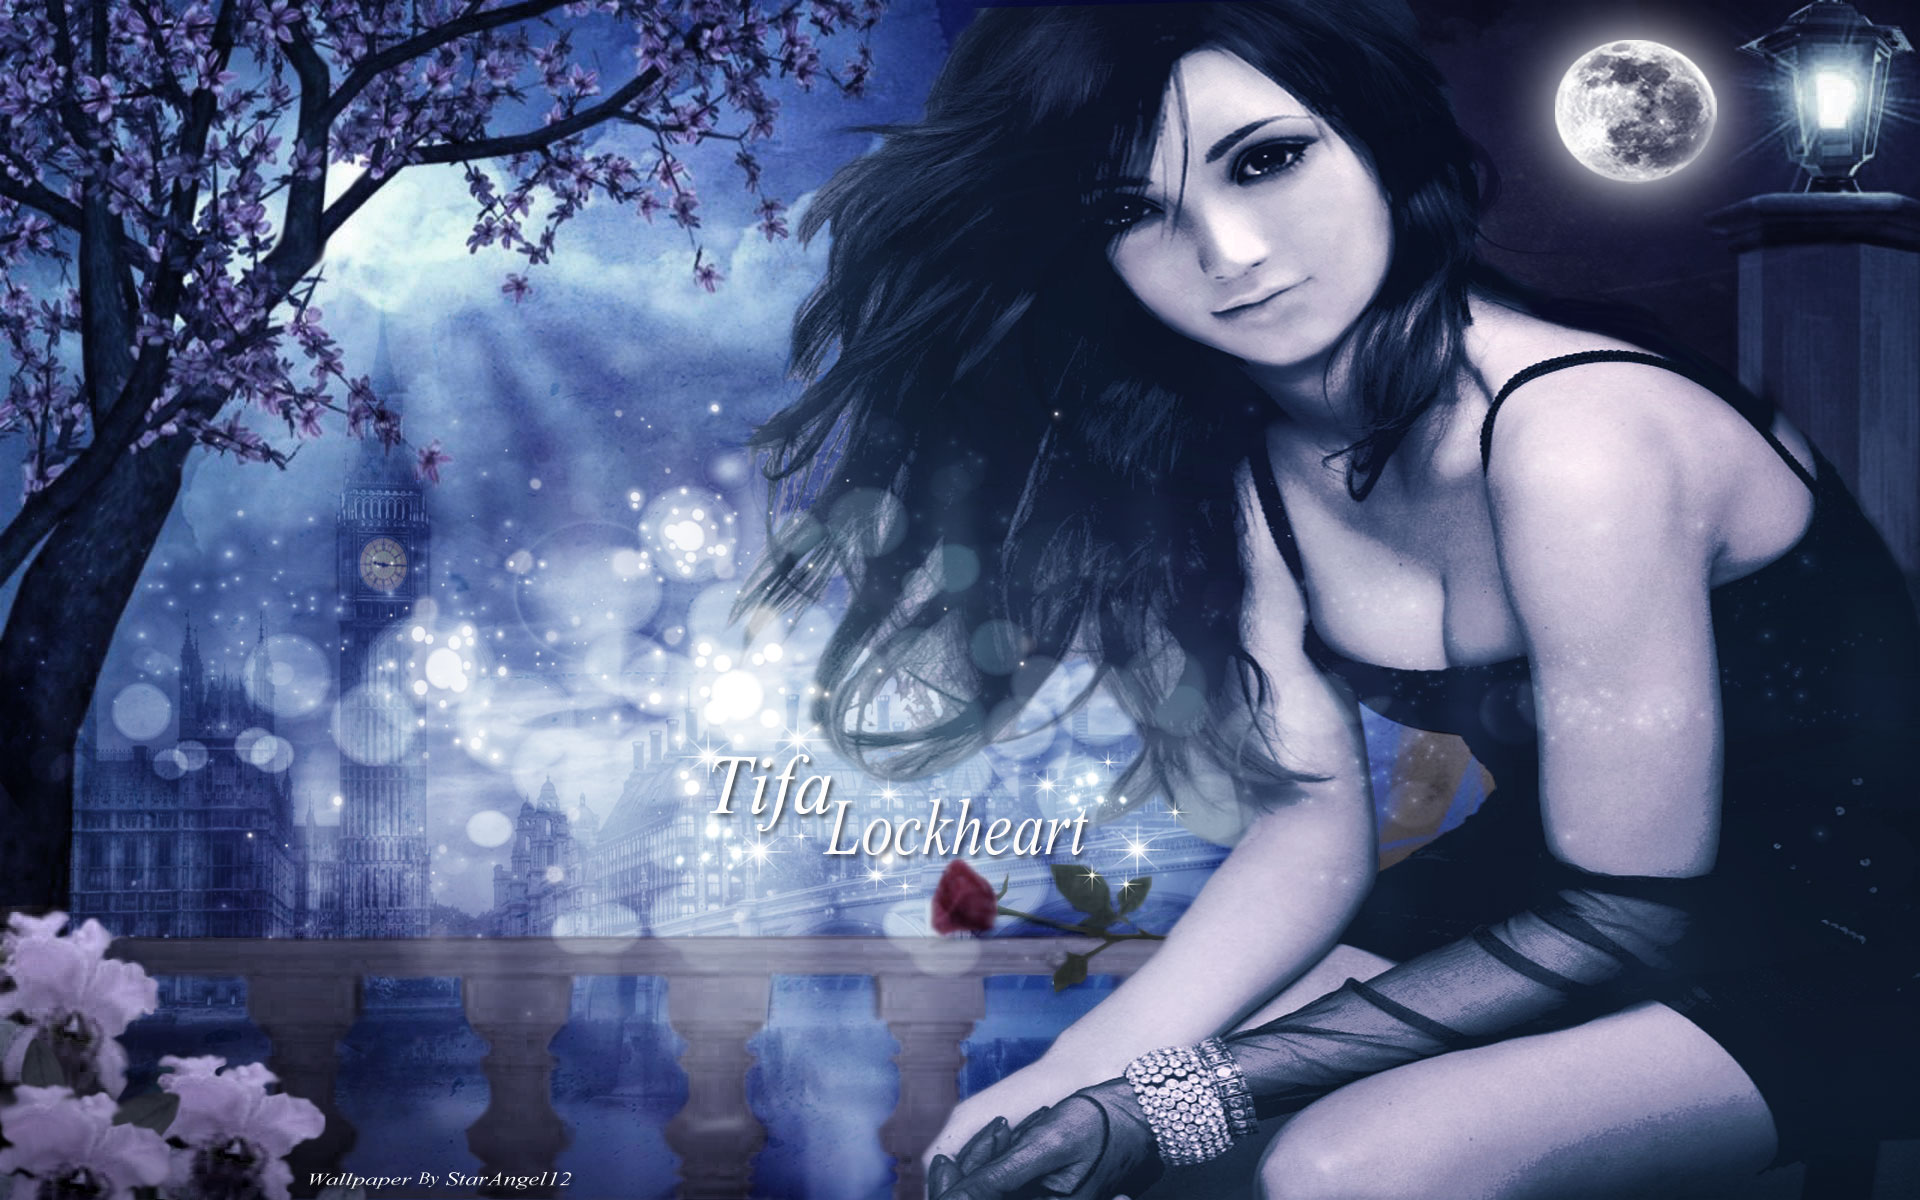 Tifa Lockhart, the iconic character from Final Fantasy VII, amid dynamic video game scenery.